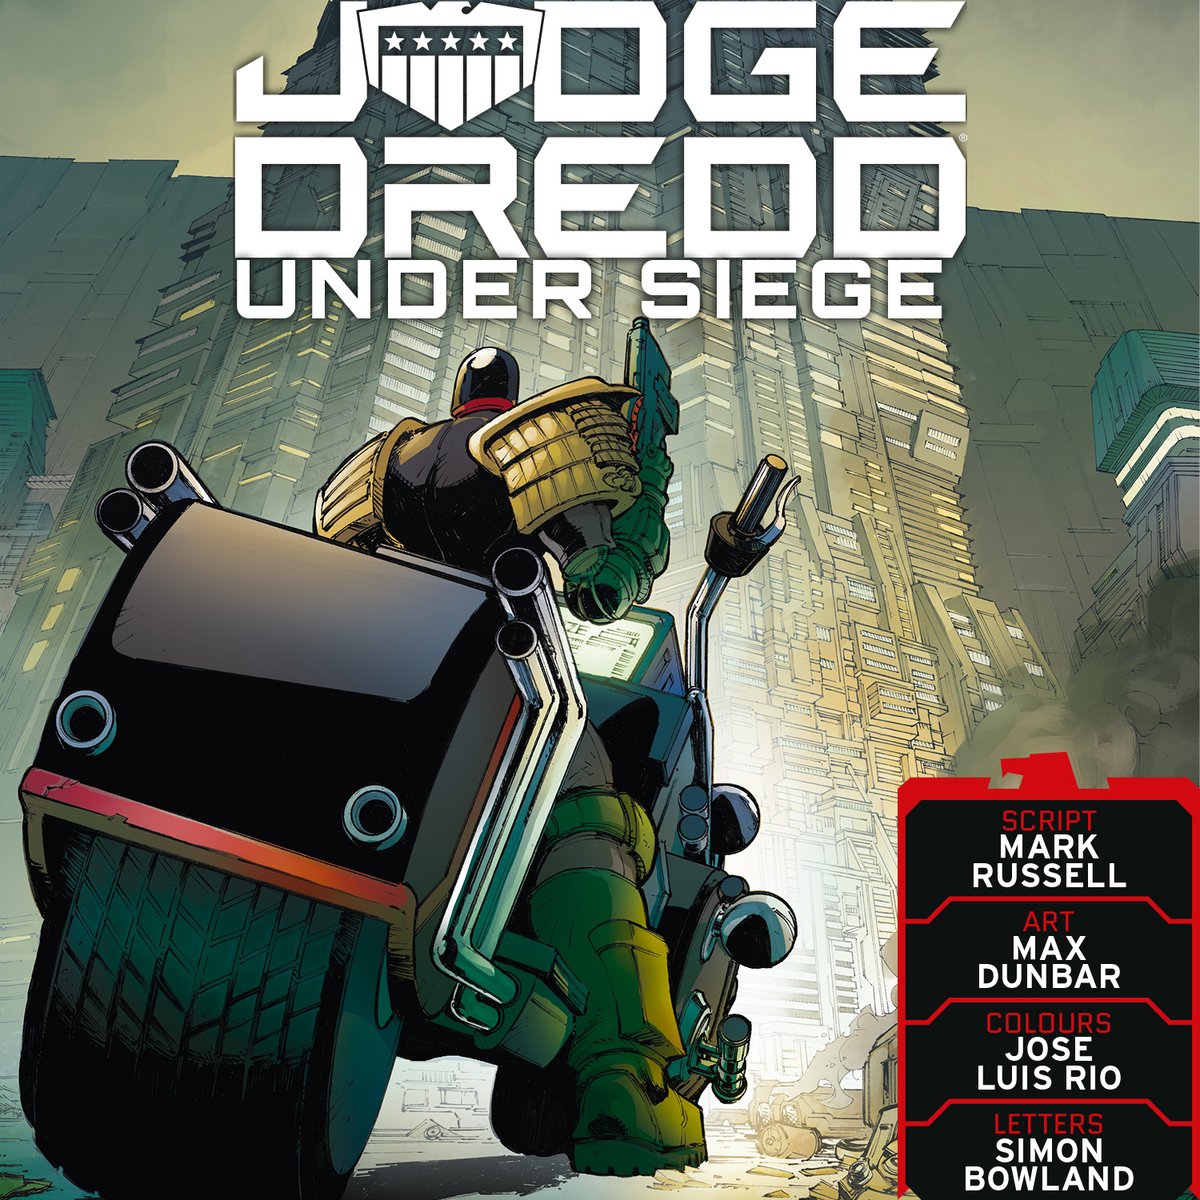 Judge Dredd Megazine 464 is out on 17th January, featuring JUDGE DREDD: UNDER SIEGE, by: 📝 Script: @Manruss ✏️ Art: @Max_Dunbar 🎨 Colour: Jose Luis Rio 💬 Letters: @SimonBowland Subscribe now and receive zarjaz free gifts ➡️ bit.ly/2Ws04uc